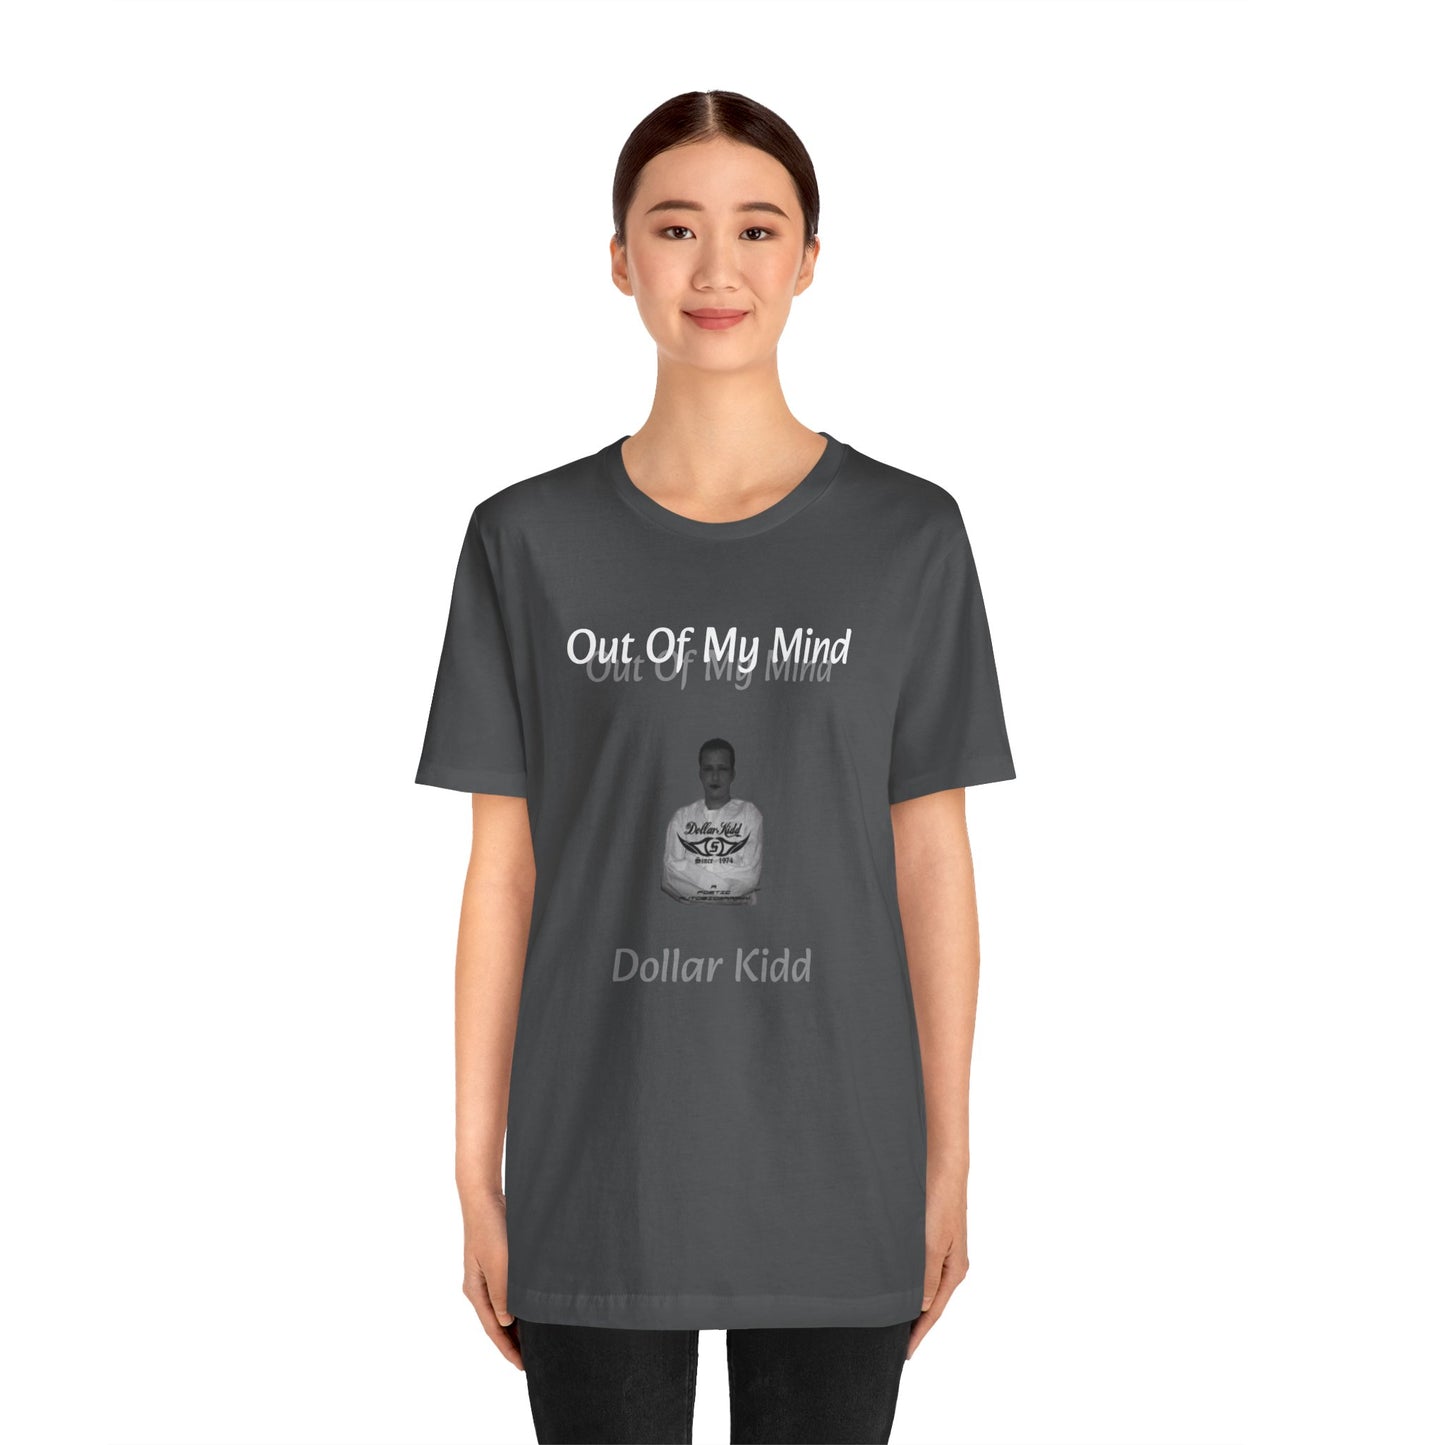 Dollar Kidd - Out Of My Mind FRONT ONLY Unisex Jersey Short Sleeve Tee